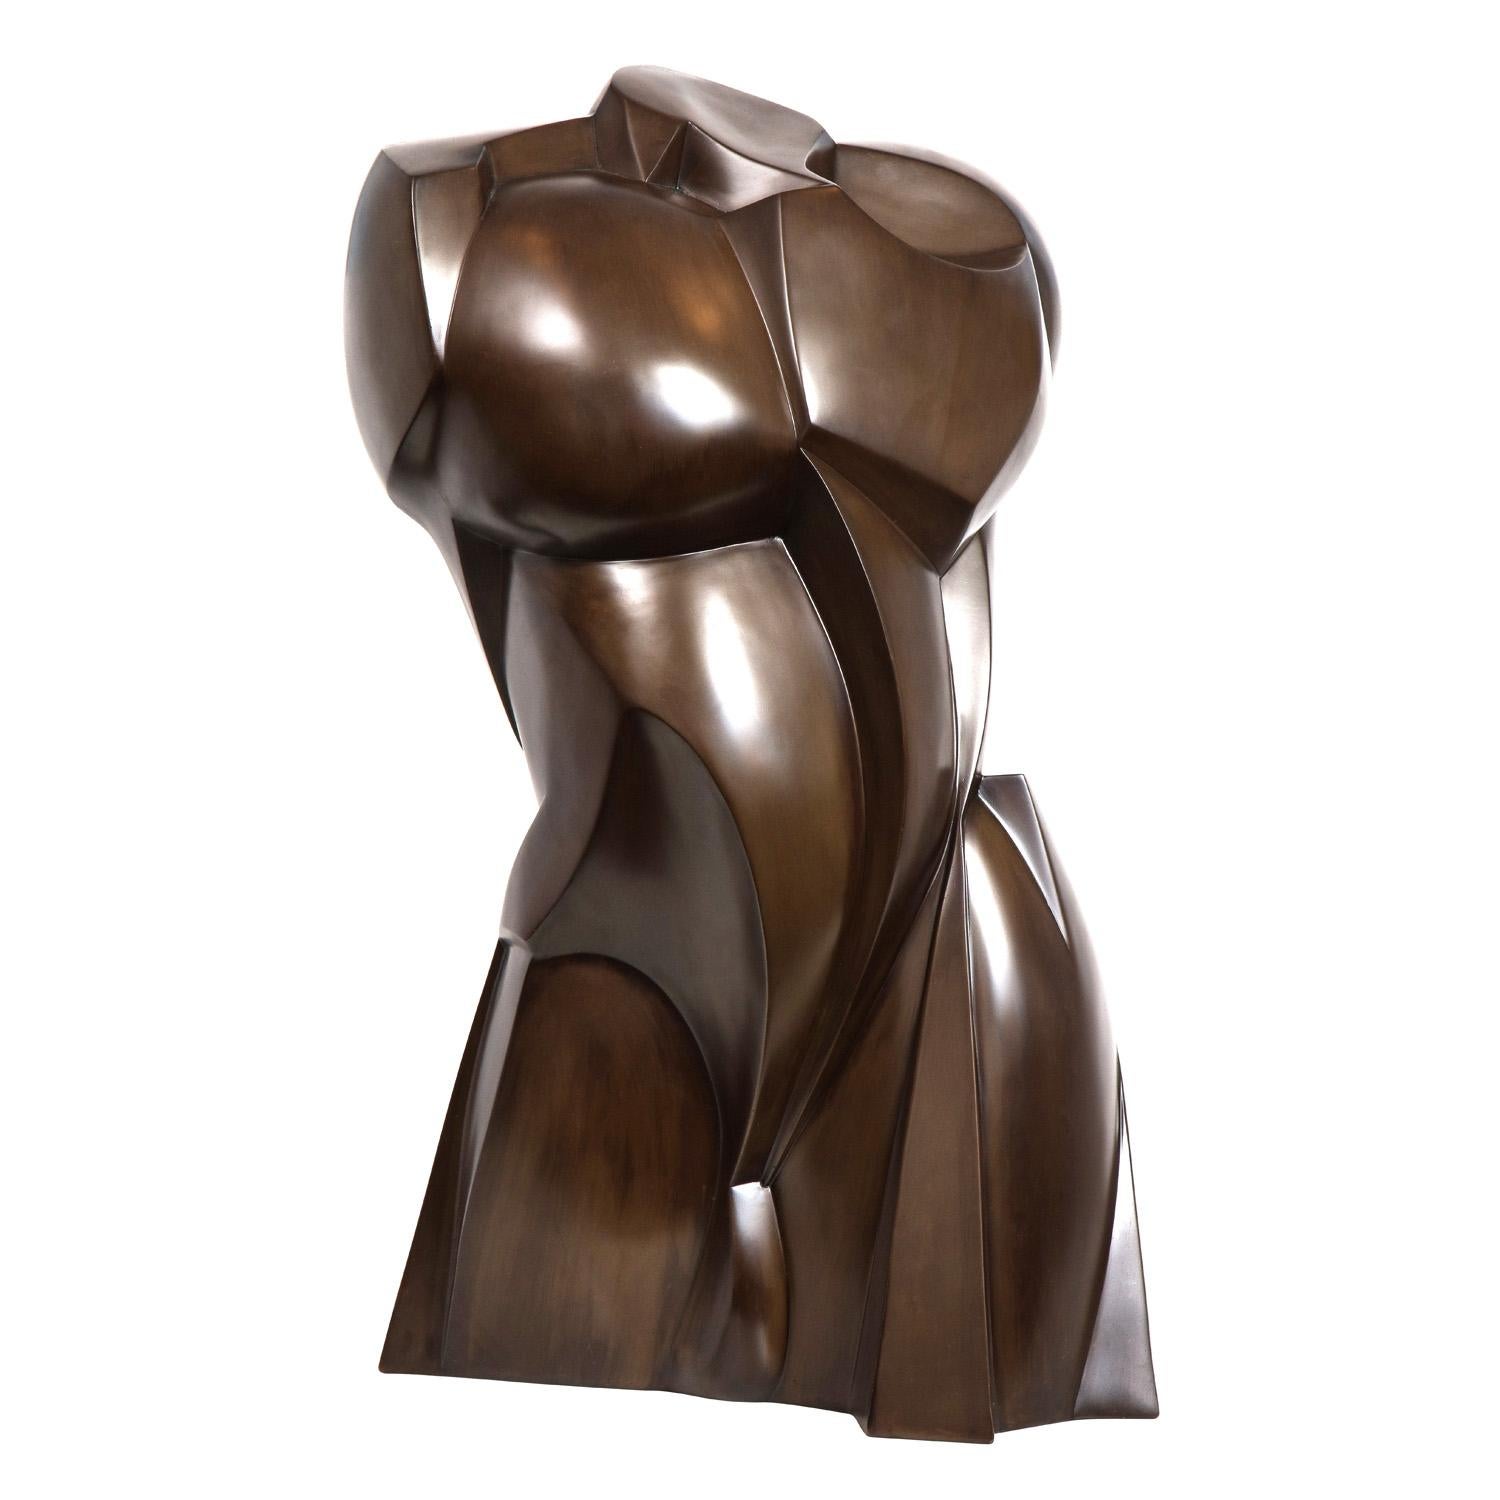 Large stylized torso in glazierite by Roberto Estevez for Karl Springer, American 1980's. Glazierite was a resin composite created by Karl Springer’s artisans. This model was also cast in bronze and can be seen in an Architectural Digest interior